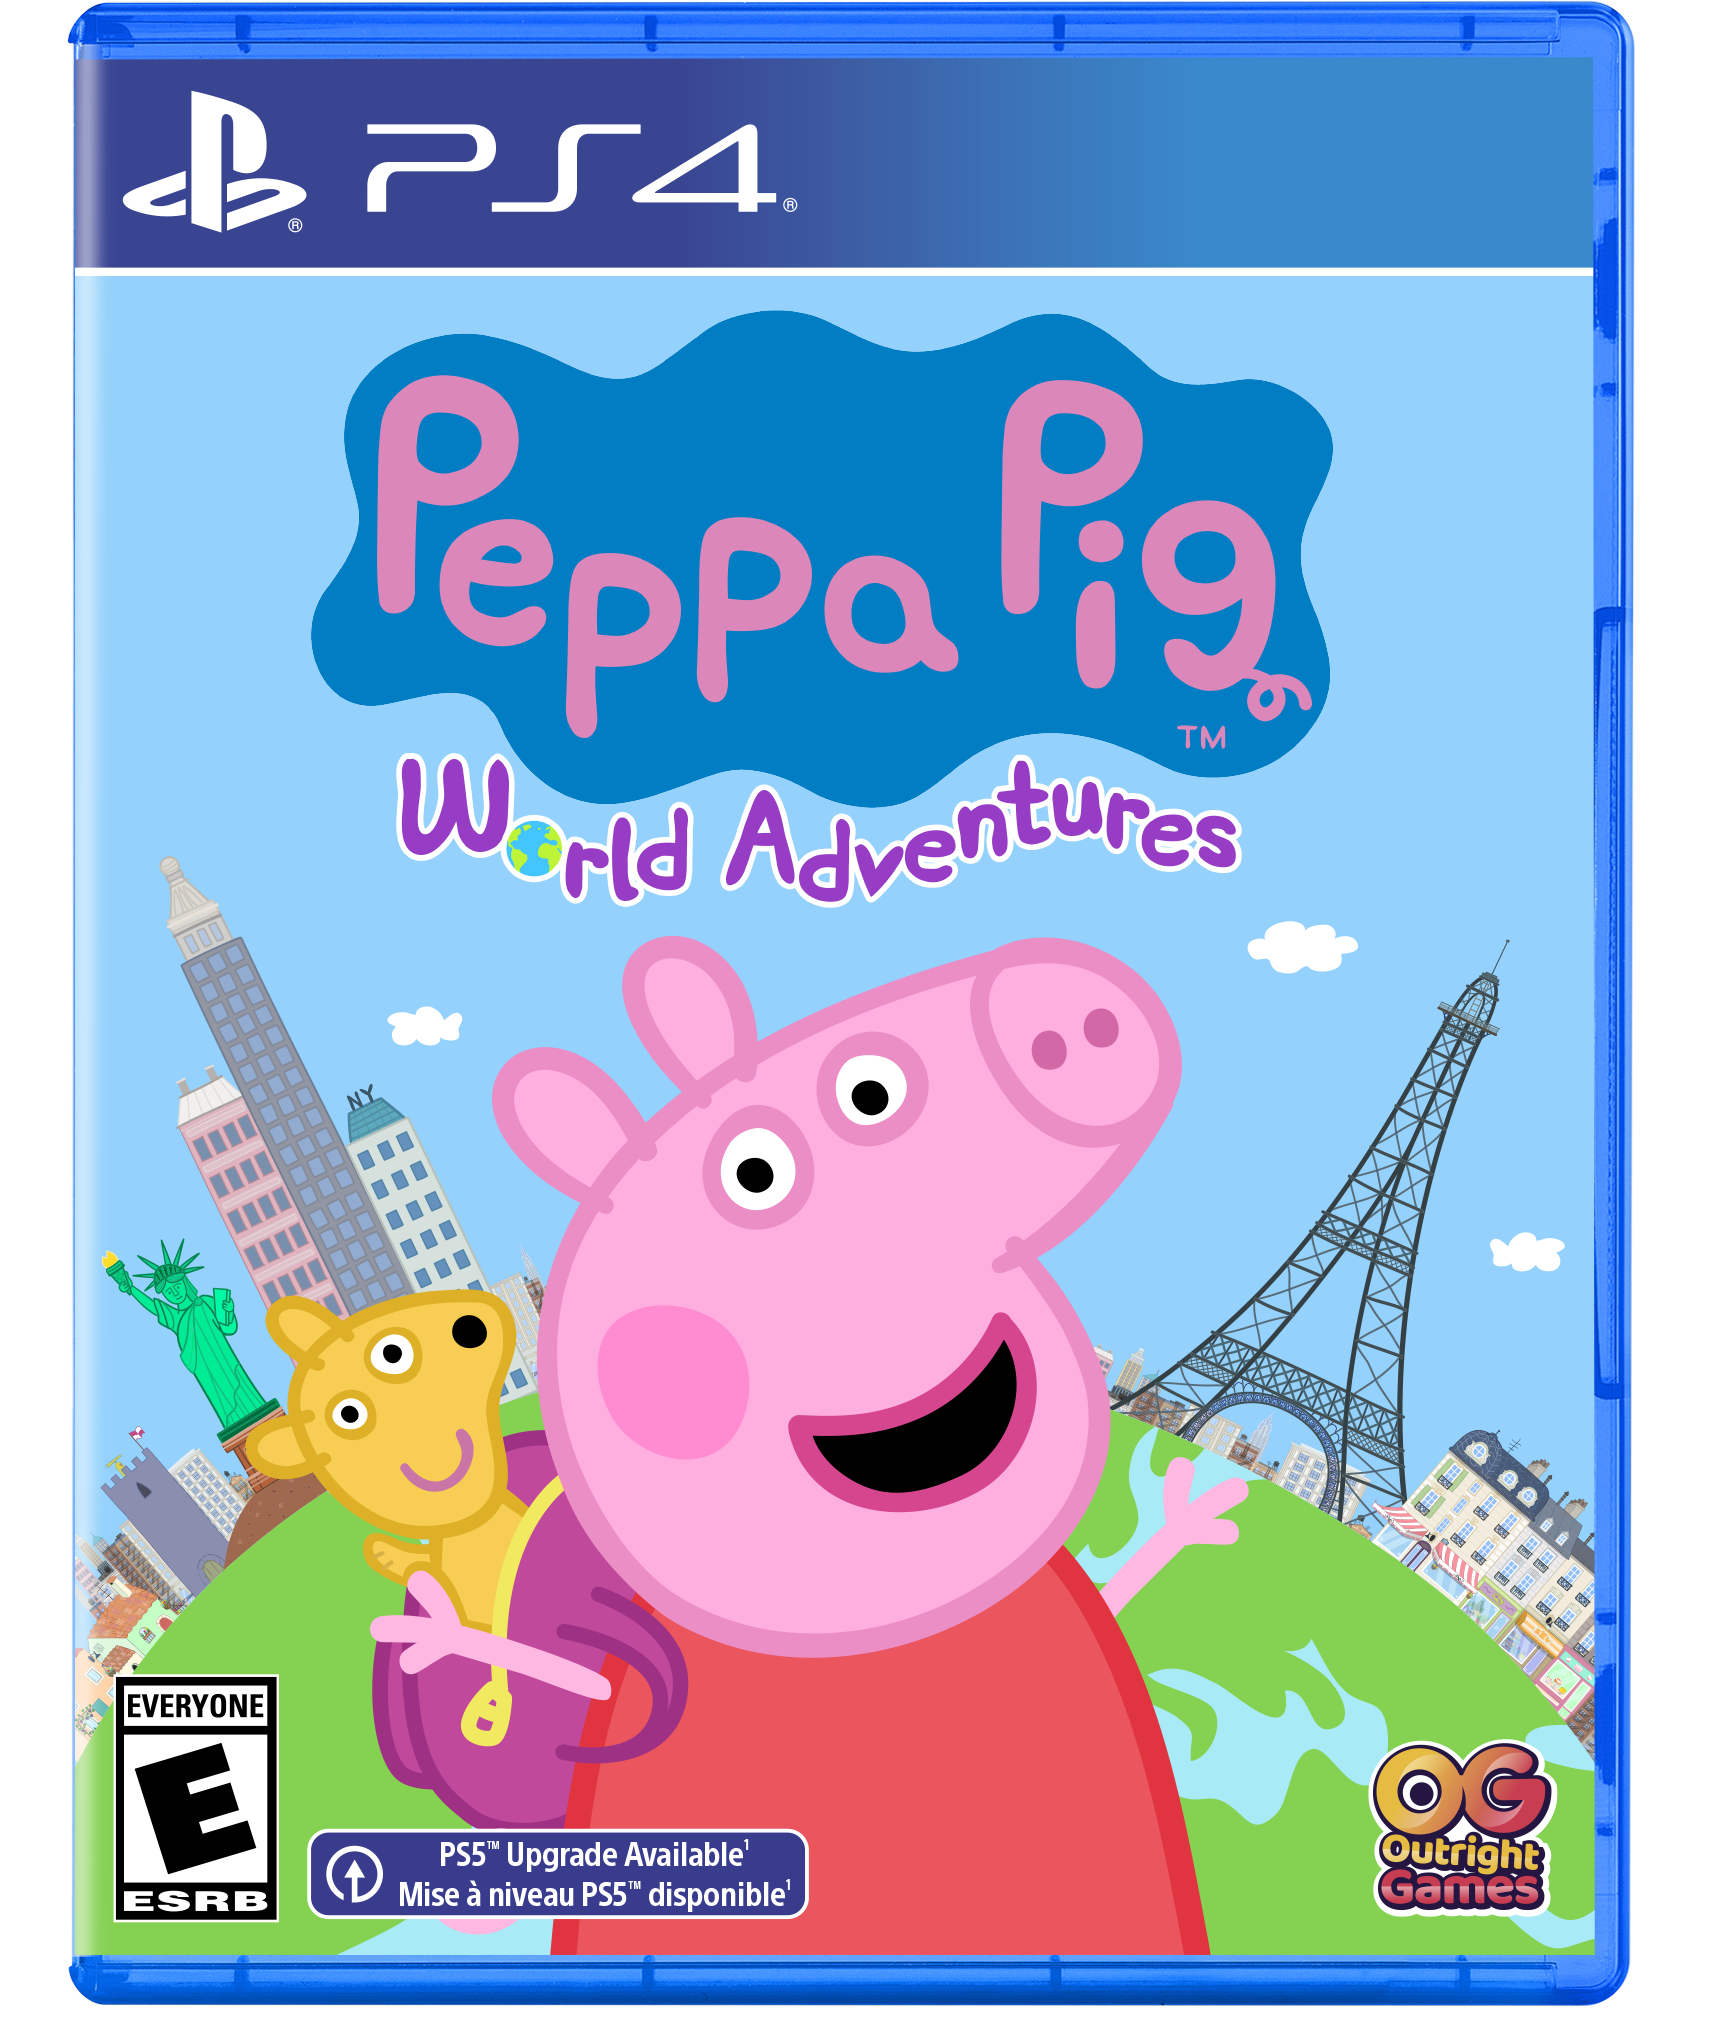 Become part of PEPPA PIG's newest adventure in a brand new console video  game launching this Autumn